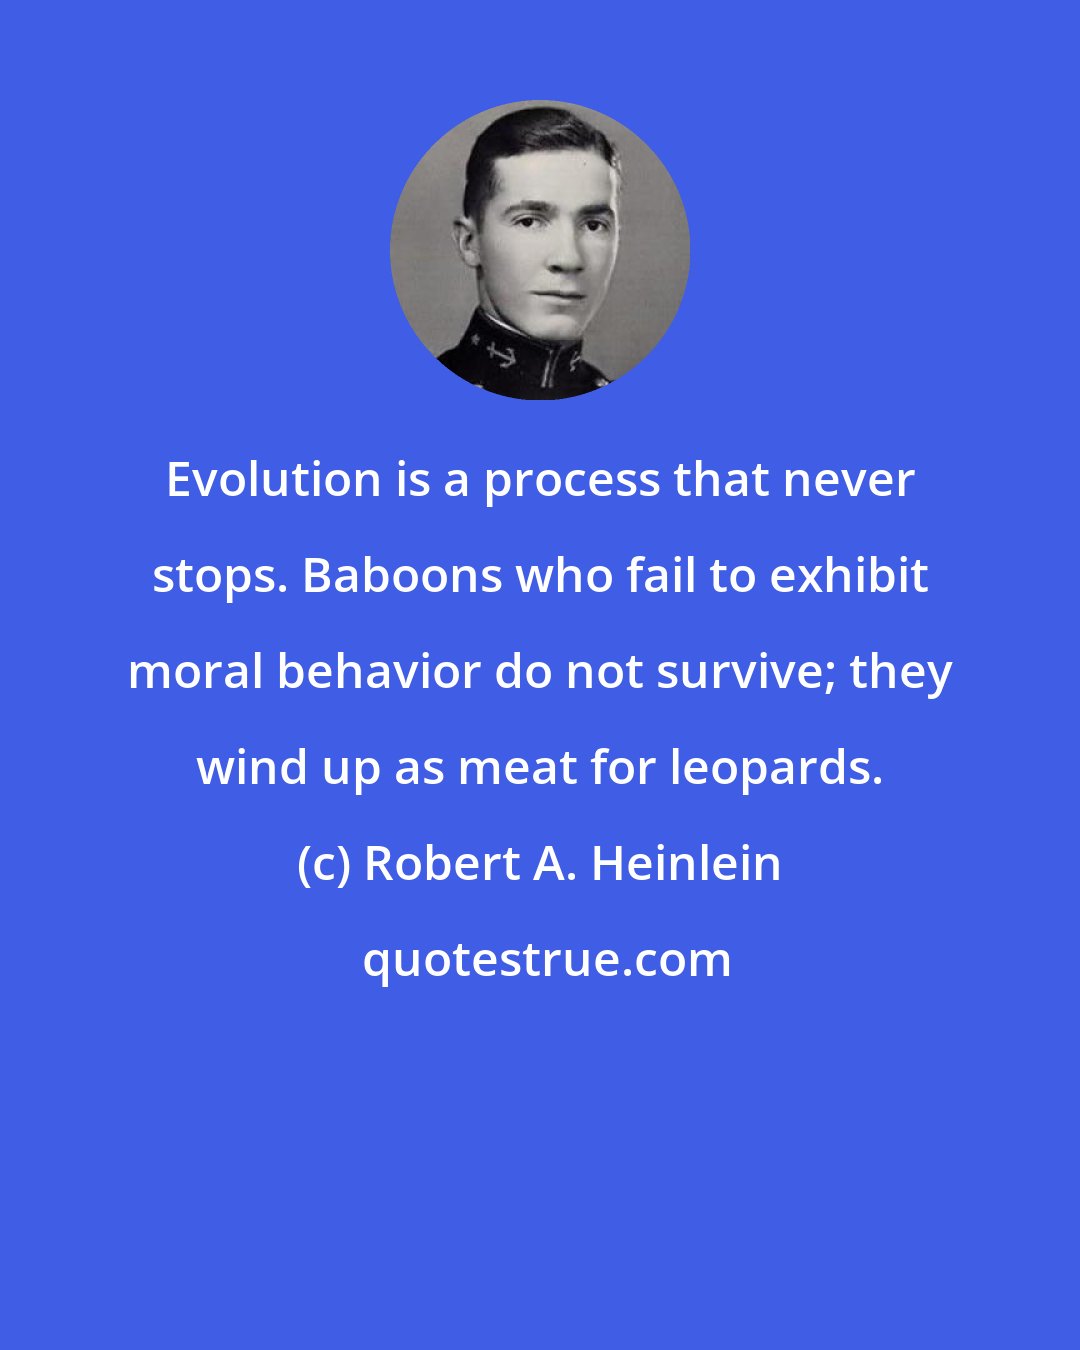 Robert A. Heinlein: Evolution is a process that never stops. Baboons who fail to exhibit moral behavior do not survive; they wind up as meat for leopards.